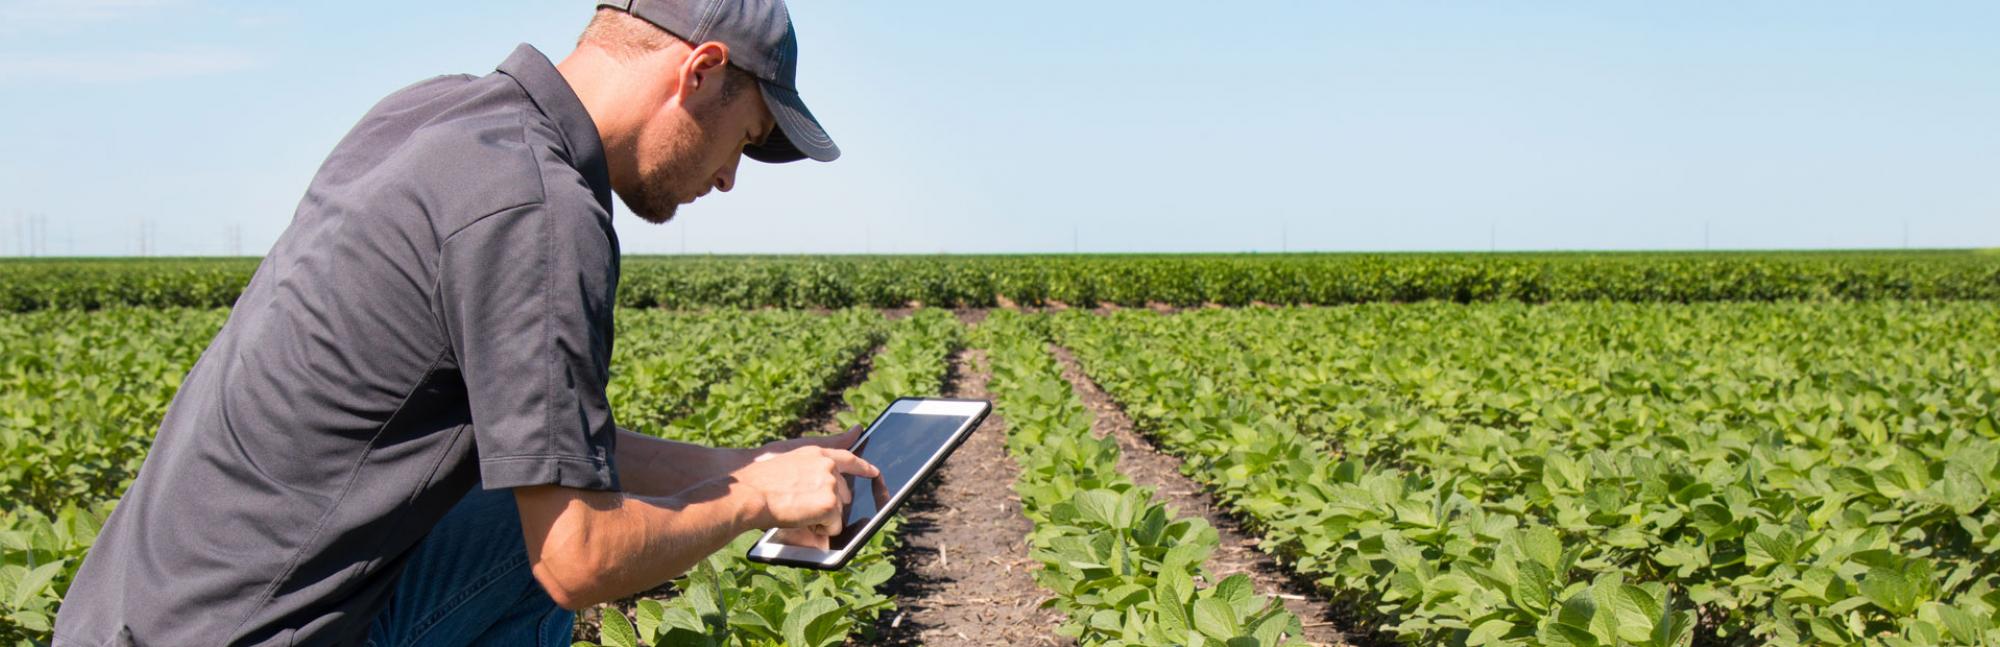 Agronomist using a tablet in a field to check crop growth